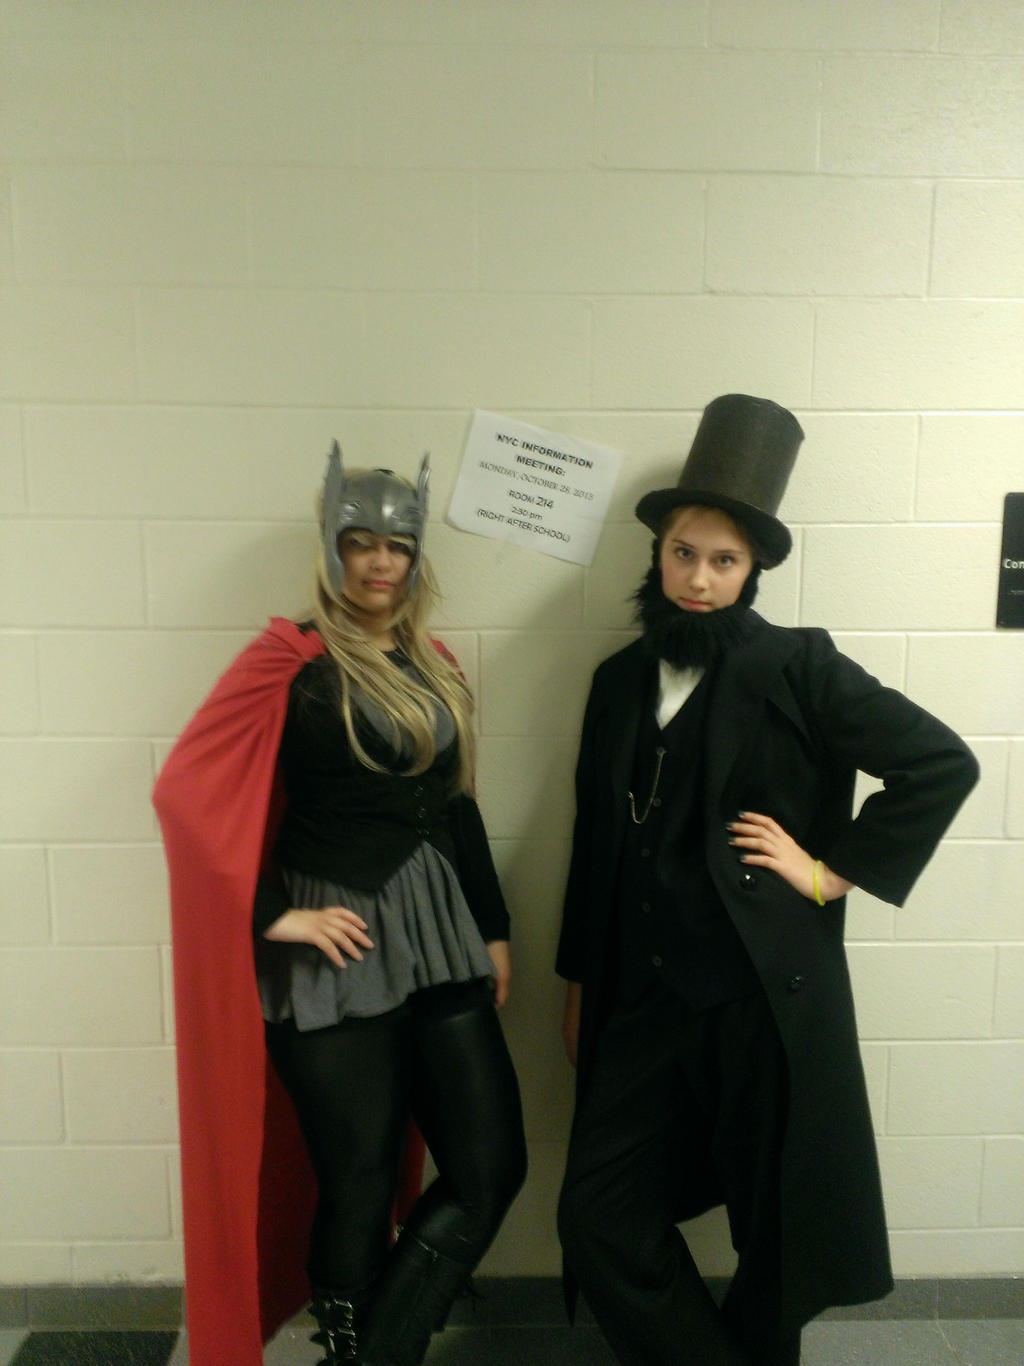 Thori and Aba Lincoln are not amused!